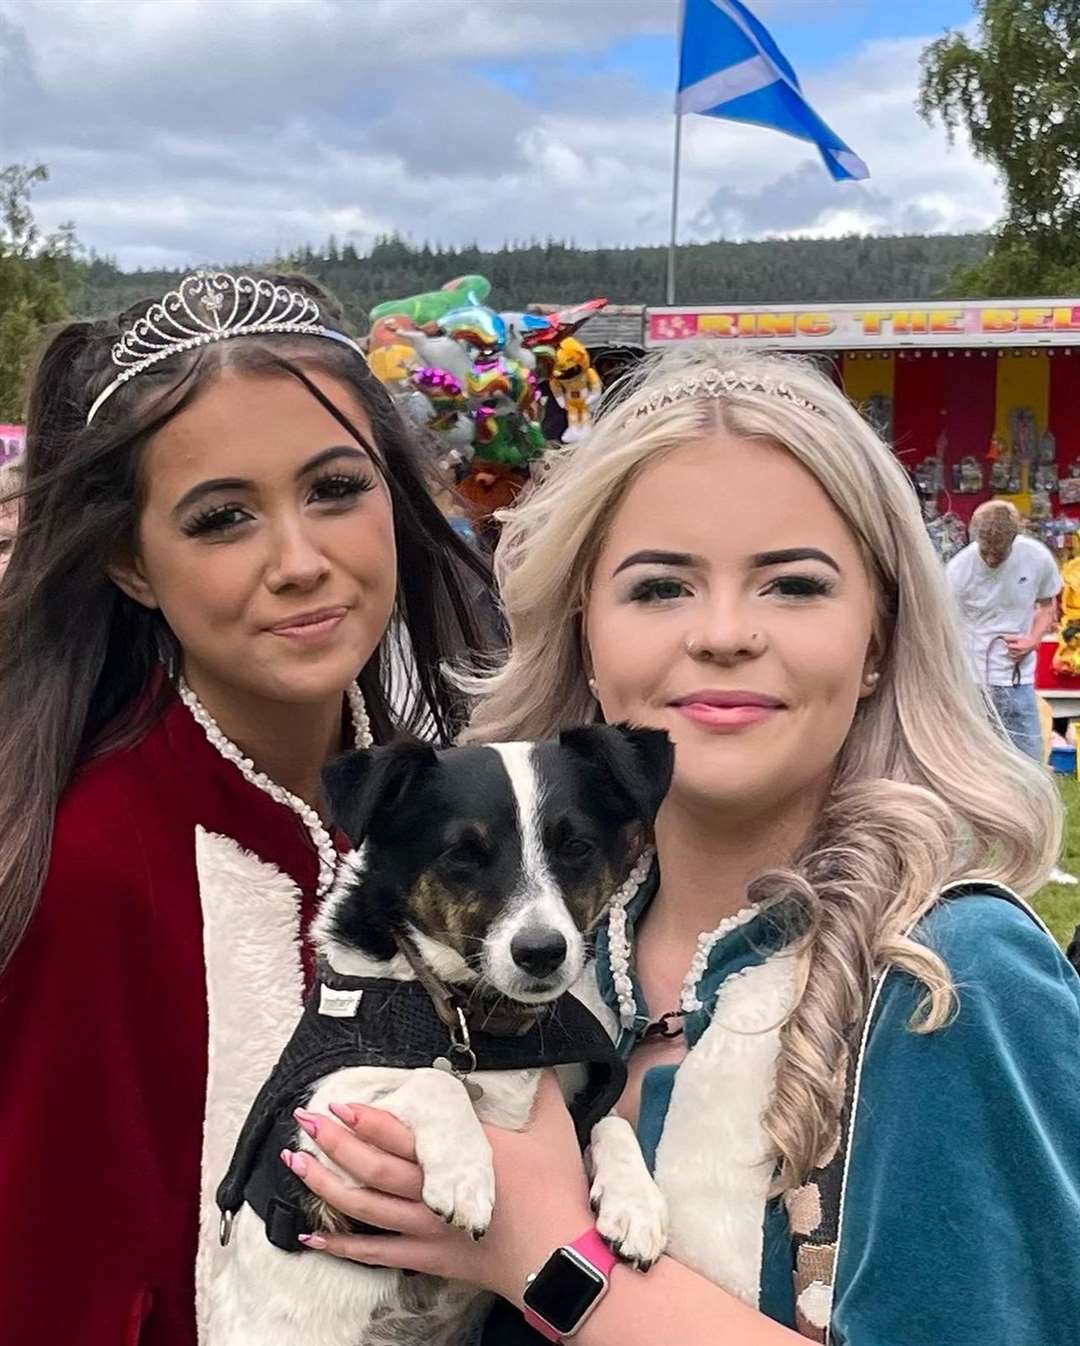 Gala Queen Chloe Dey (left) and attendant Anna Park with the Pet Parade winner Digger. Picture: Daniel McLauchlan